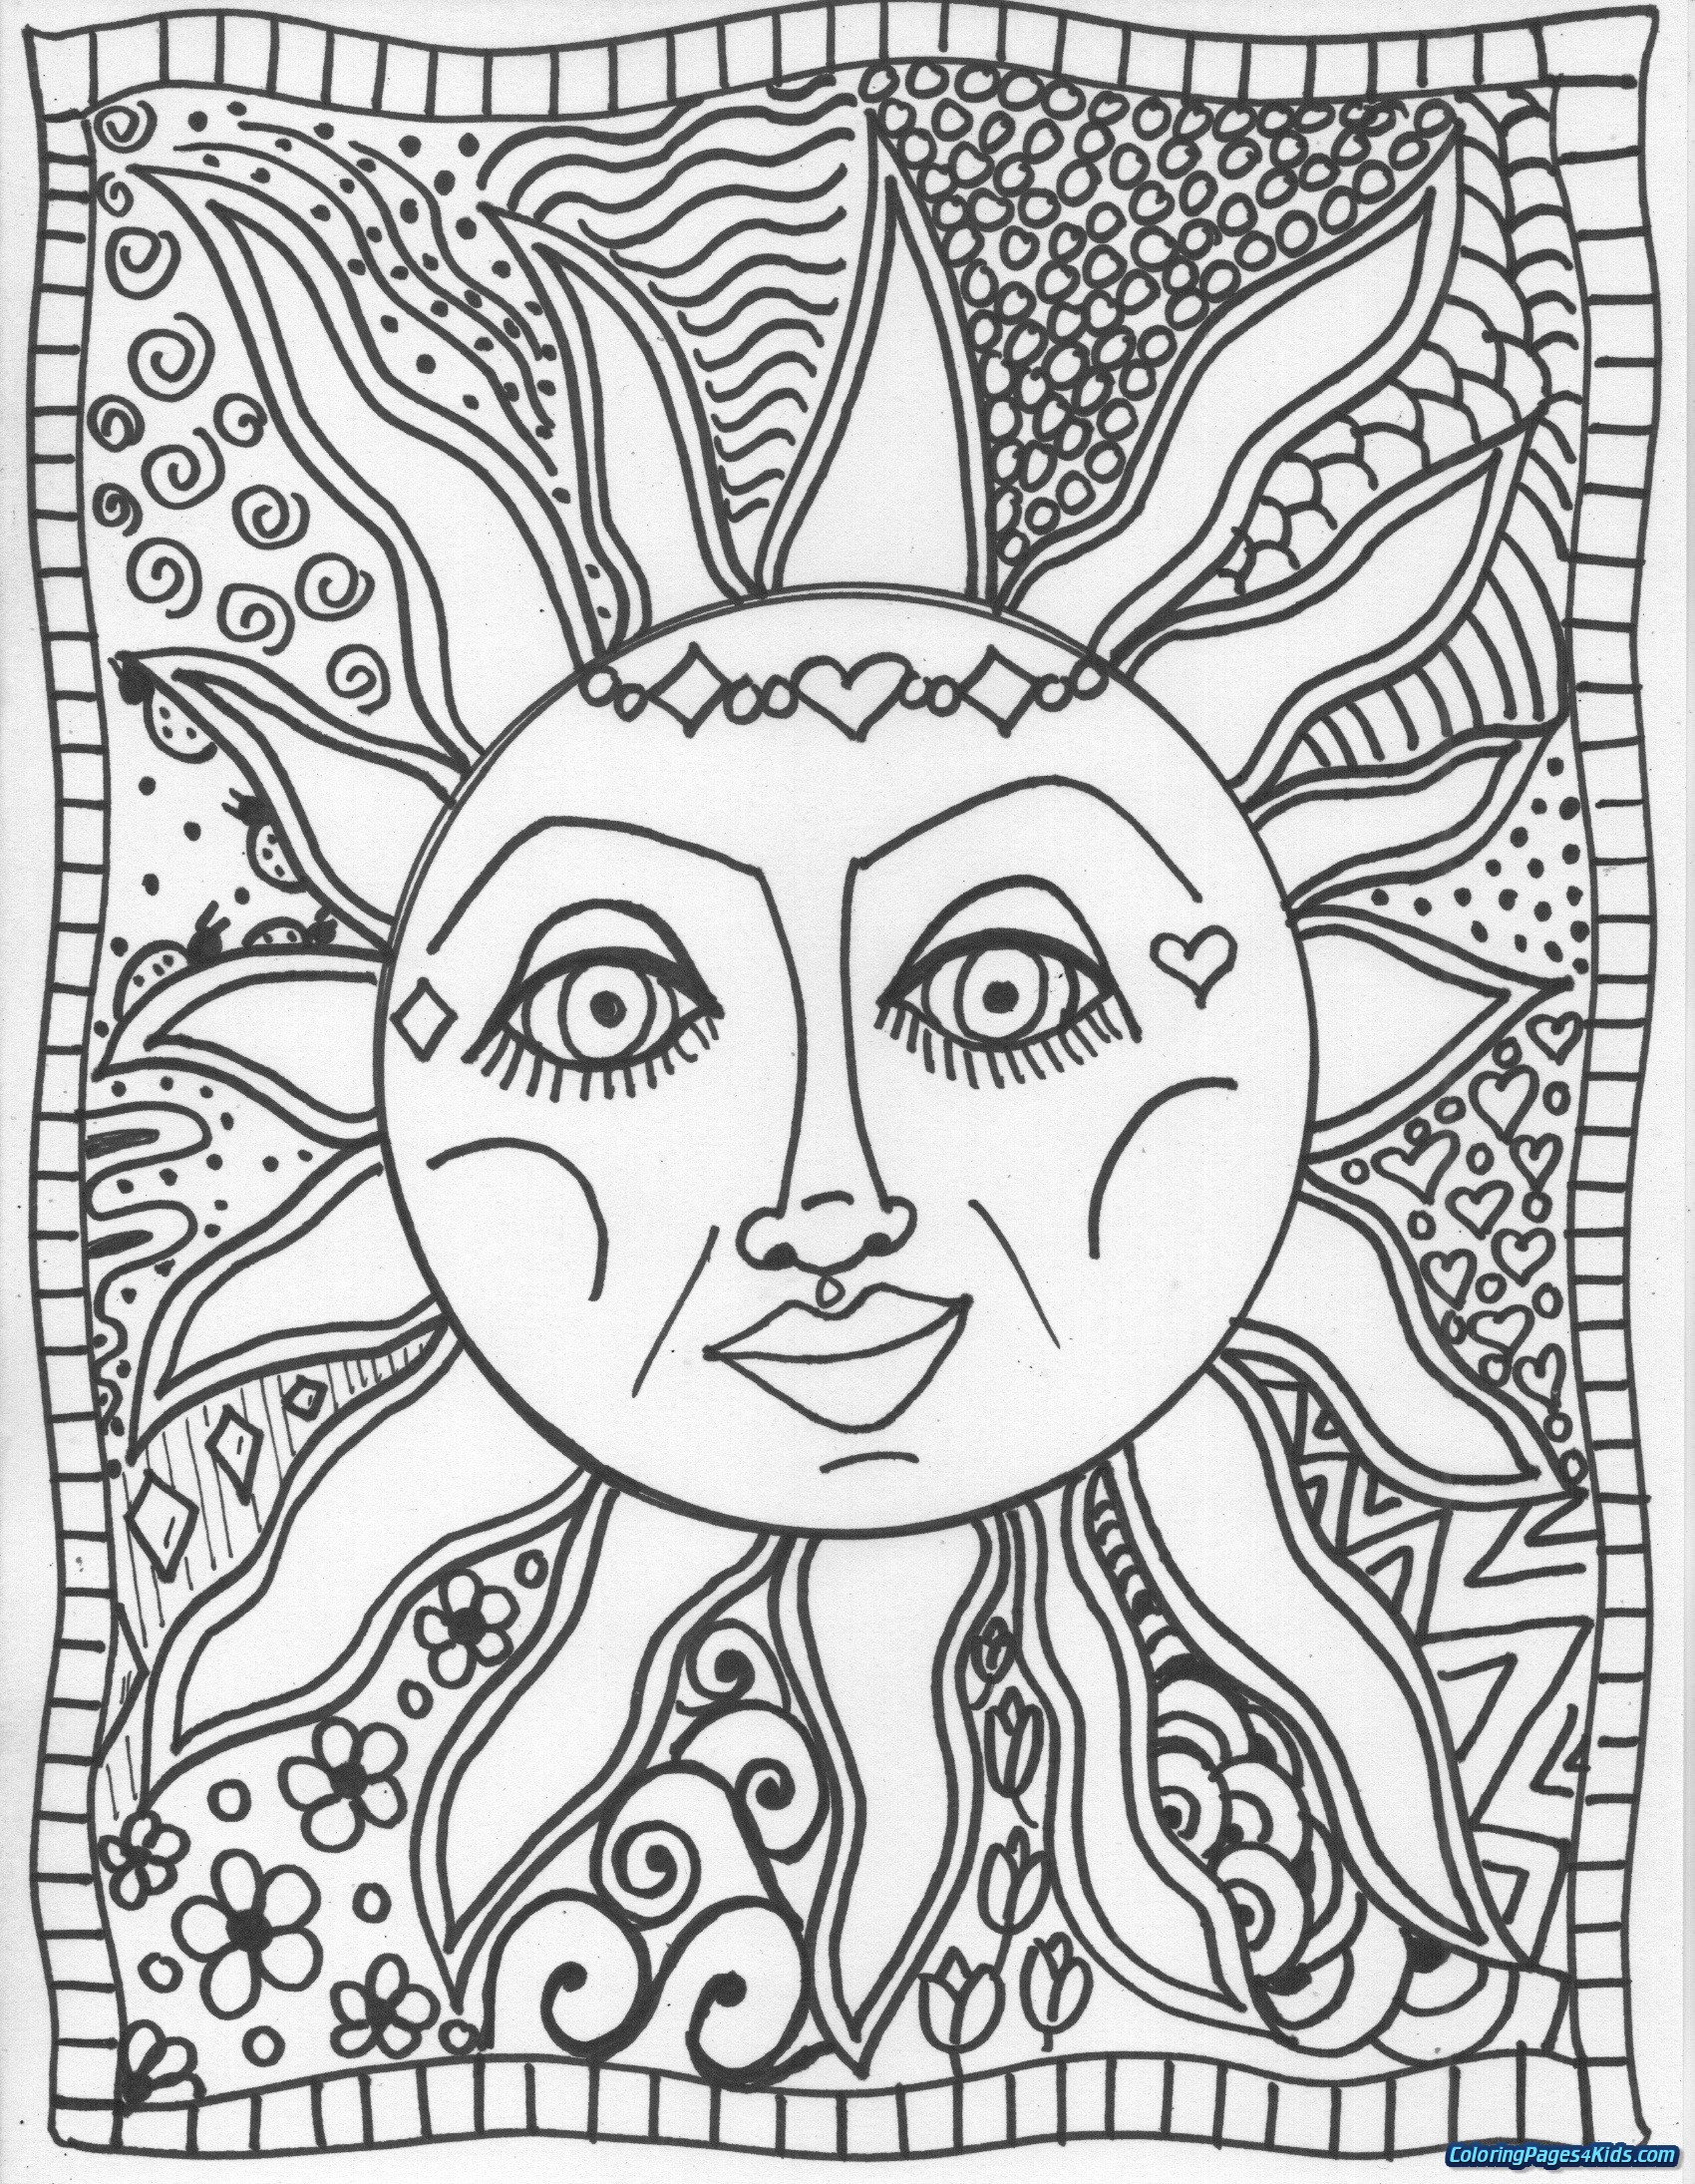 Coloring Pages : Top Dandy Printable Tumblr Coloring Sheets ...